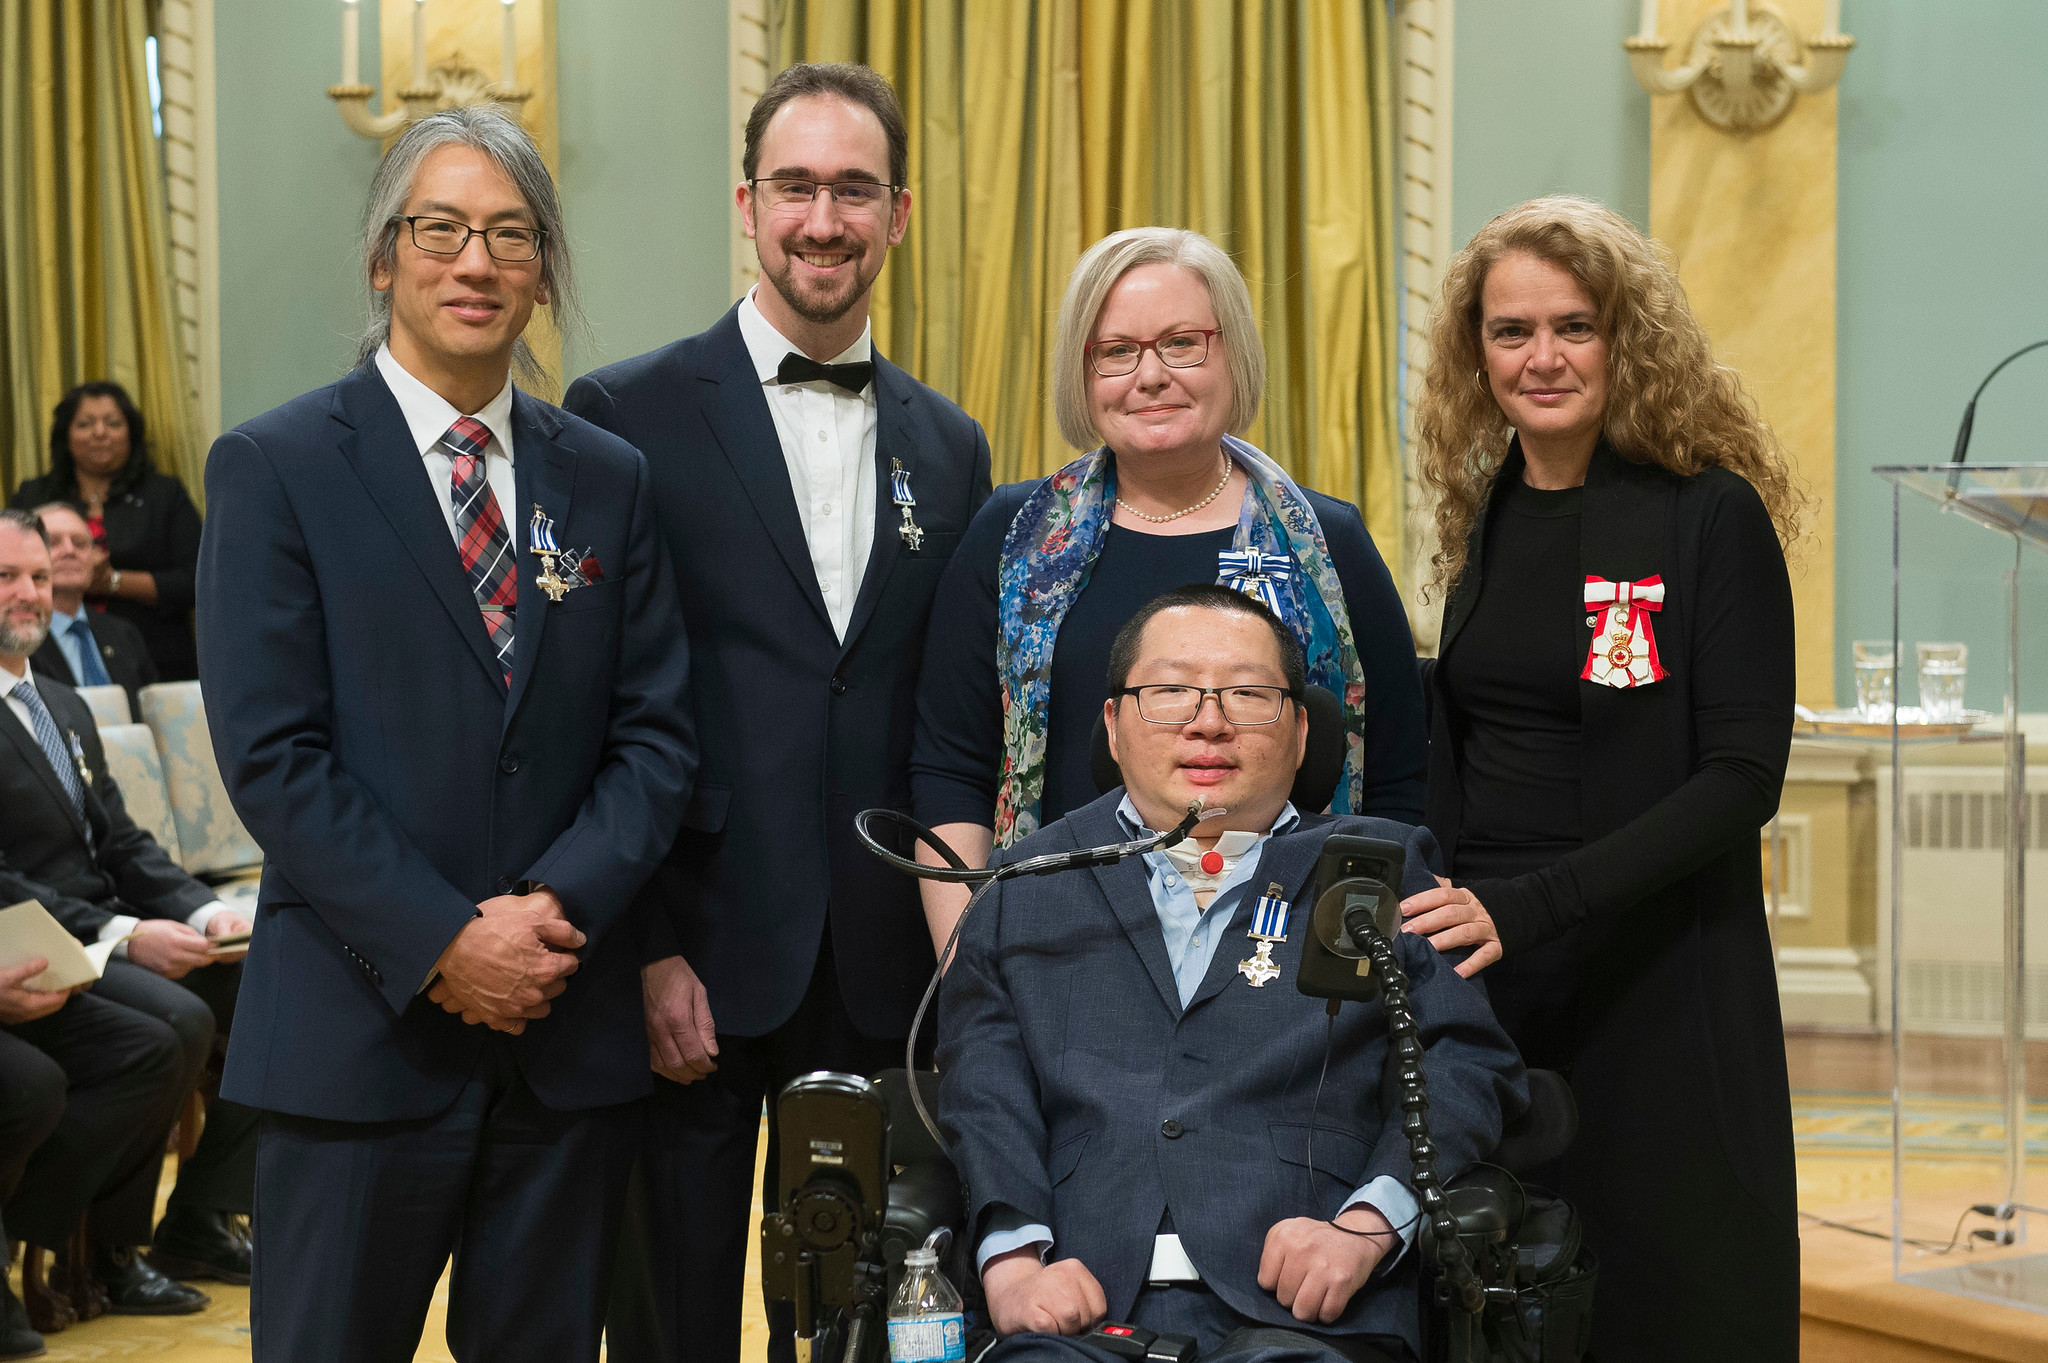 Her Excellency the Right Honourable Julie Payette (ECE MASc 9T0, at right) presents the Meritorious Service Cross to Professor Tom Chau (IBBME), Pierre Duez (EngSci 0T0, MASc IndE 0T3), Andrea Lamont, and Eric Wan (CompE 1T0, ECE MASc 1T3) on Tuesday, December 12, 2017, during a ceremony at Rideau Hall. (Credit: MCpl Vincent Carbonneau, Rideau Hall, OSGG)